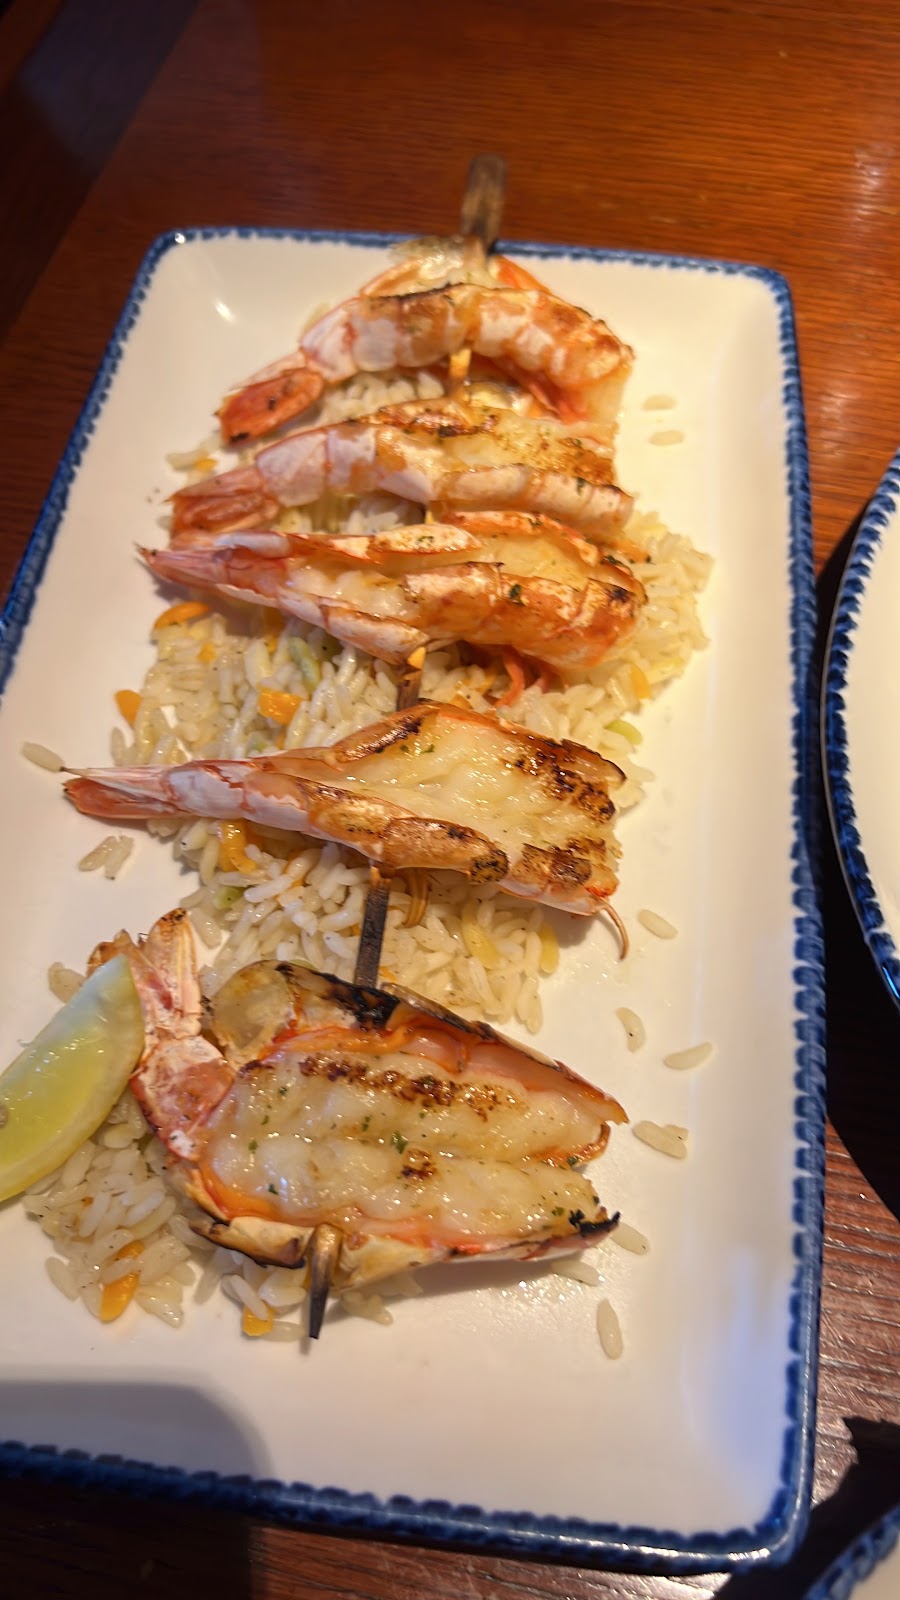 Red Lobster | NEXT TO CUMBERLAND MALL, 3849 S Delsea Dr, Vineland, NJ 08360 | Phone: (856) 825-9600